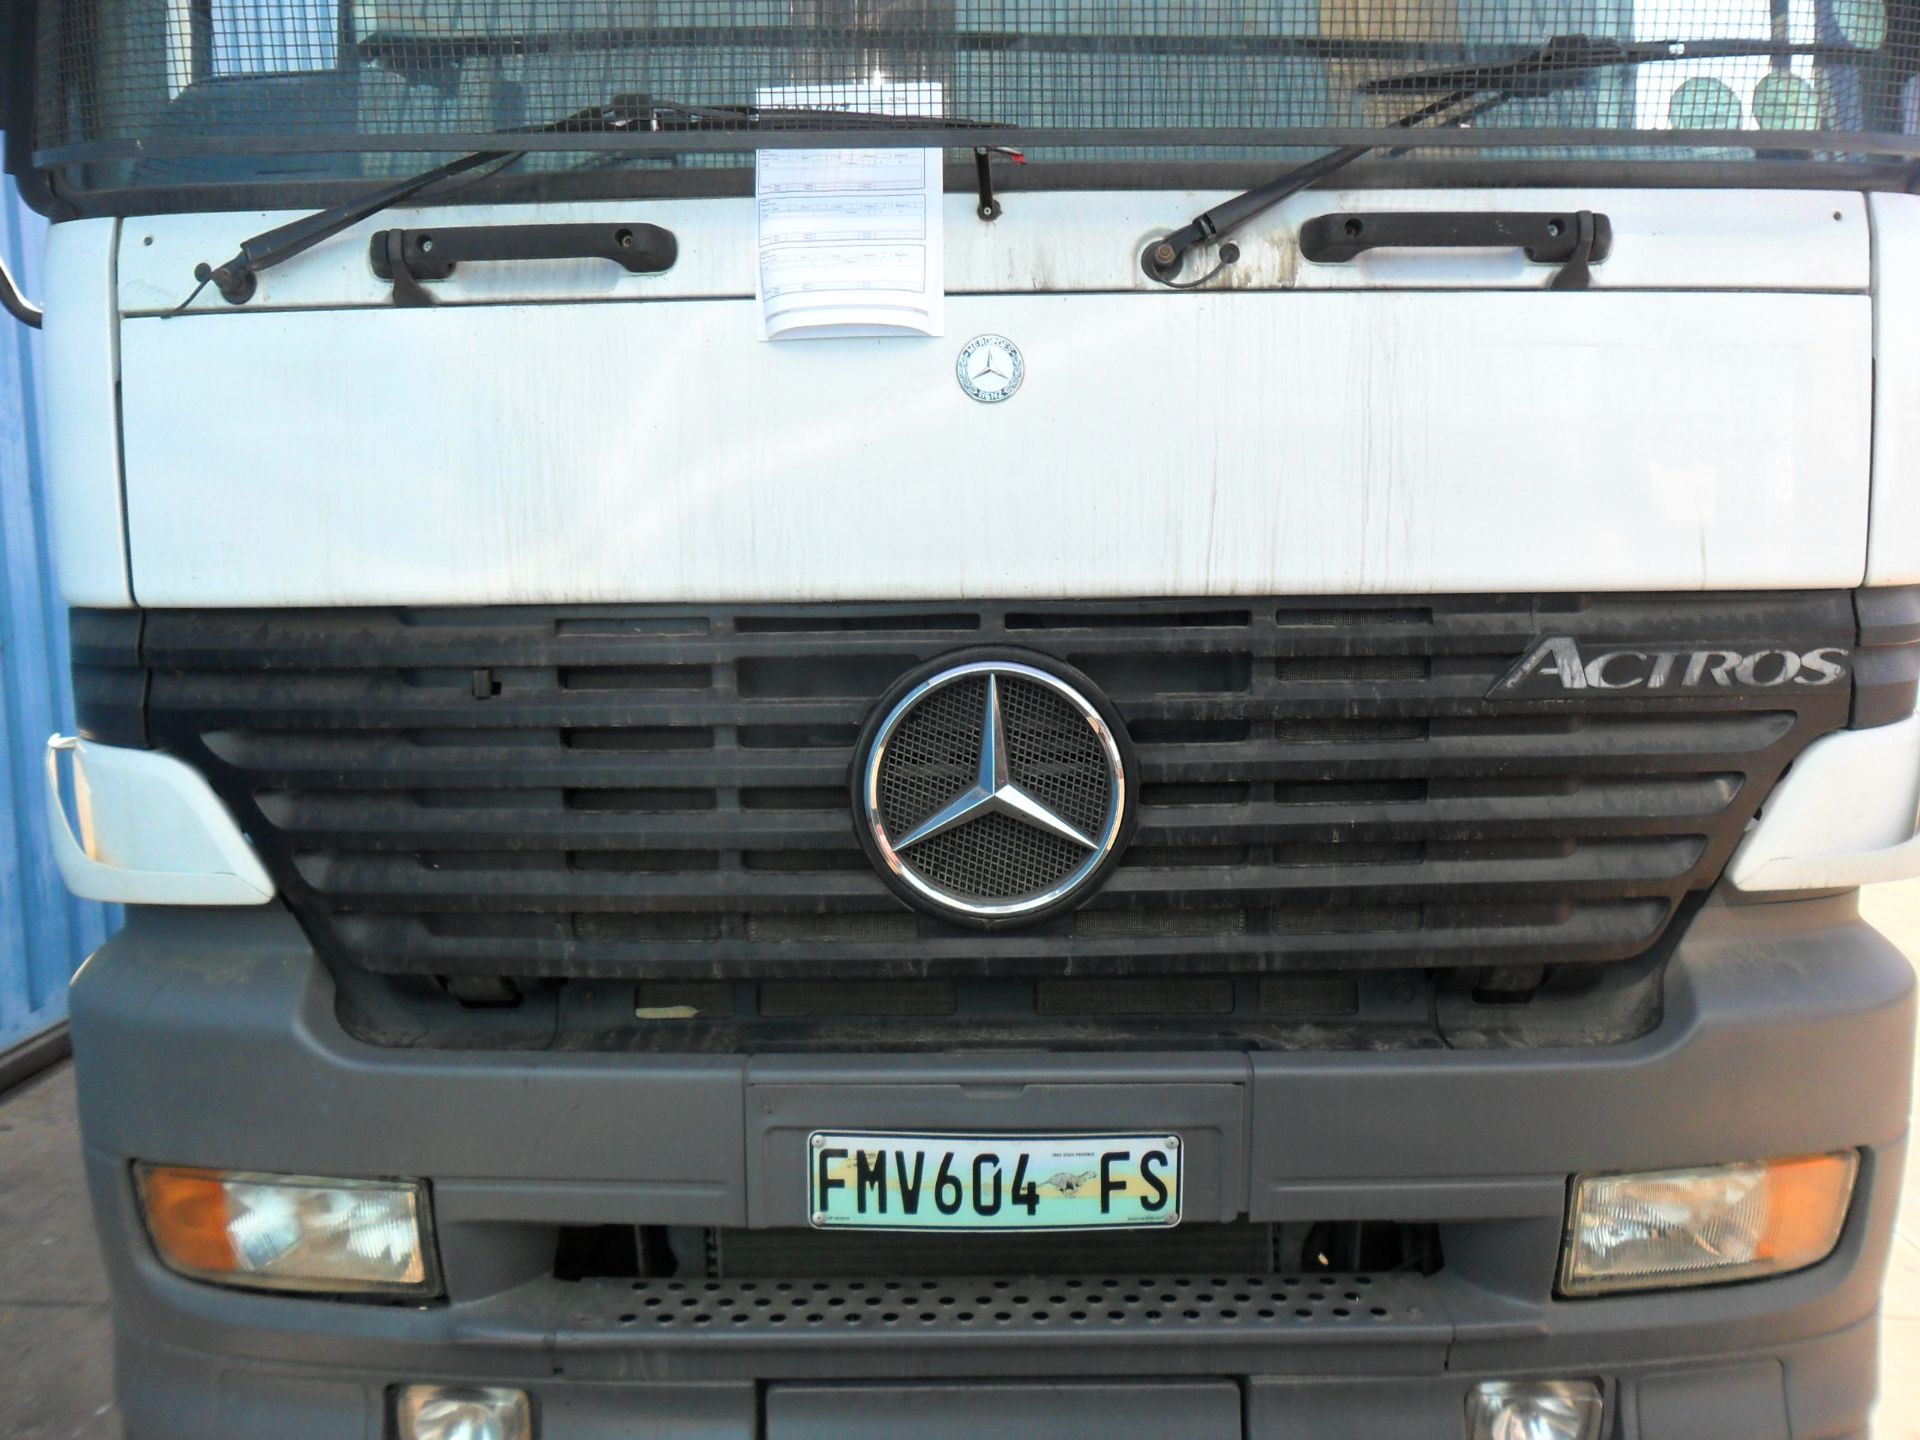 2003 M/BENZ ACTROS 2648 6X4 T/T - REG NO: FMV604FS - (ITEM TO BE SOLD SUBJECT TO CONFIRMATION) - Image 3 of 5